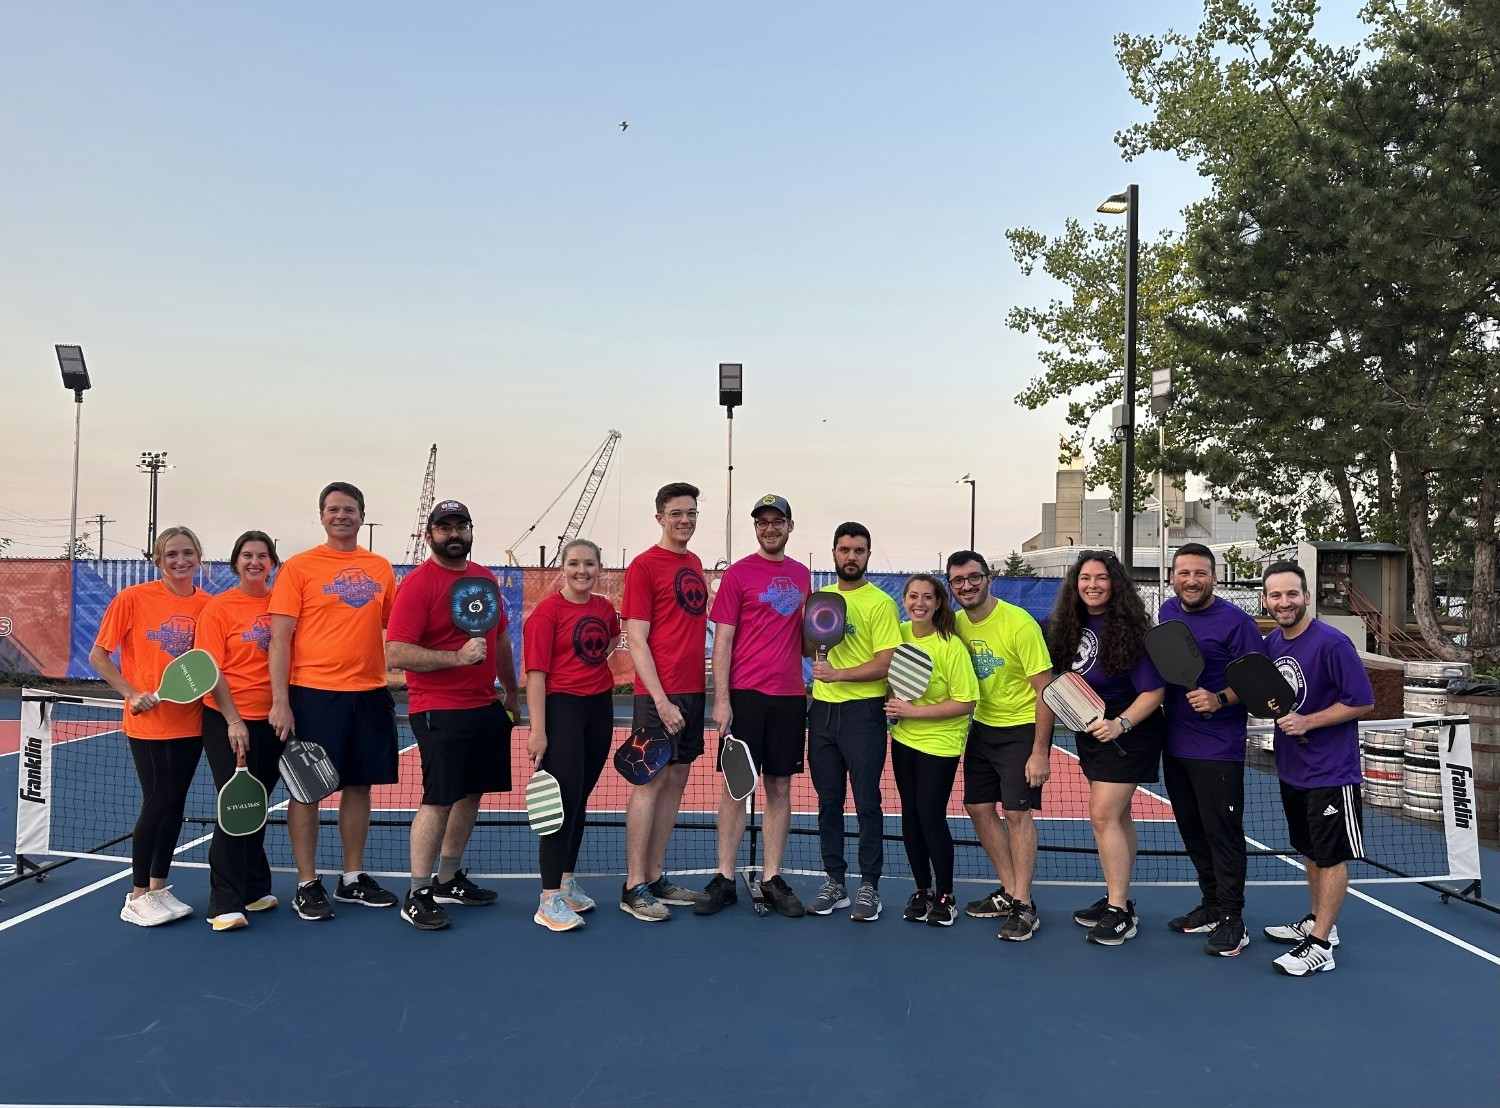 829's Pickleball League in Boston's Seaport on the night of their championship game.